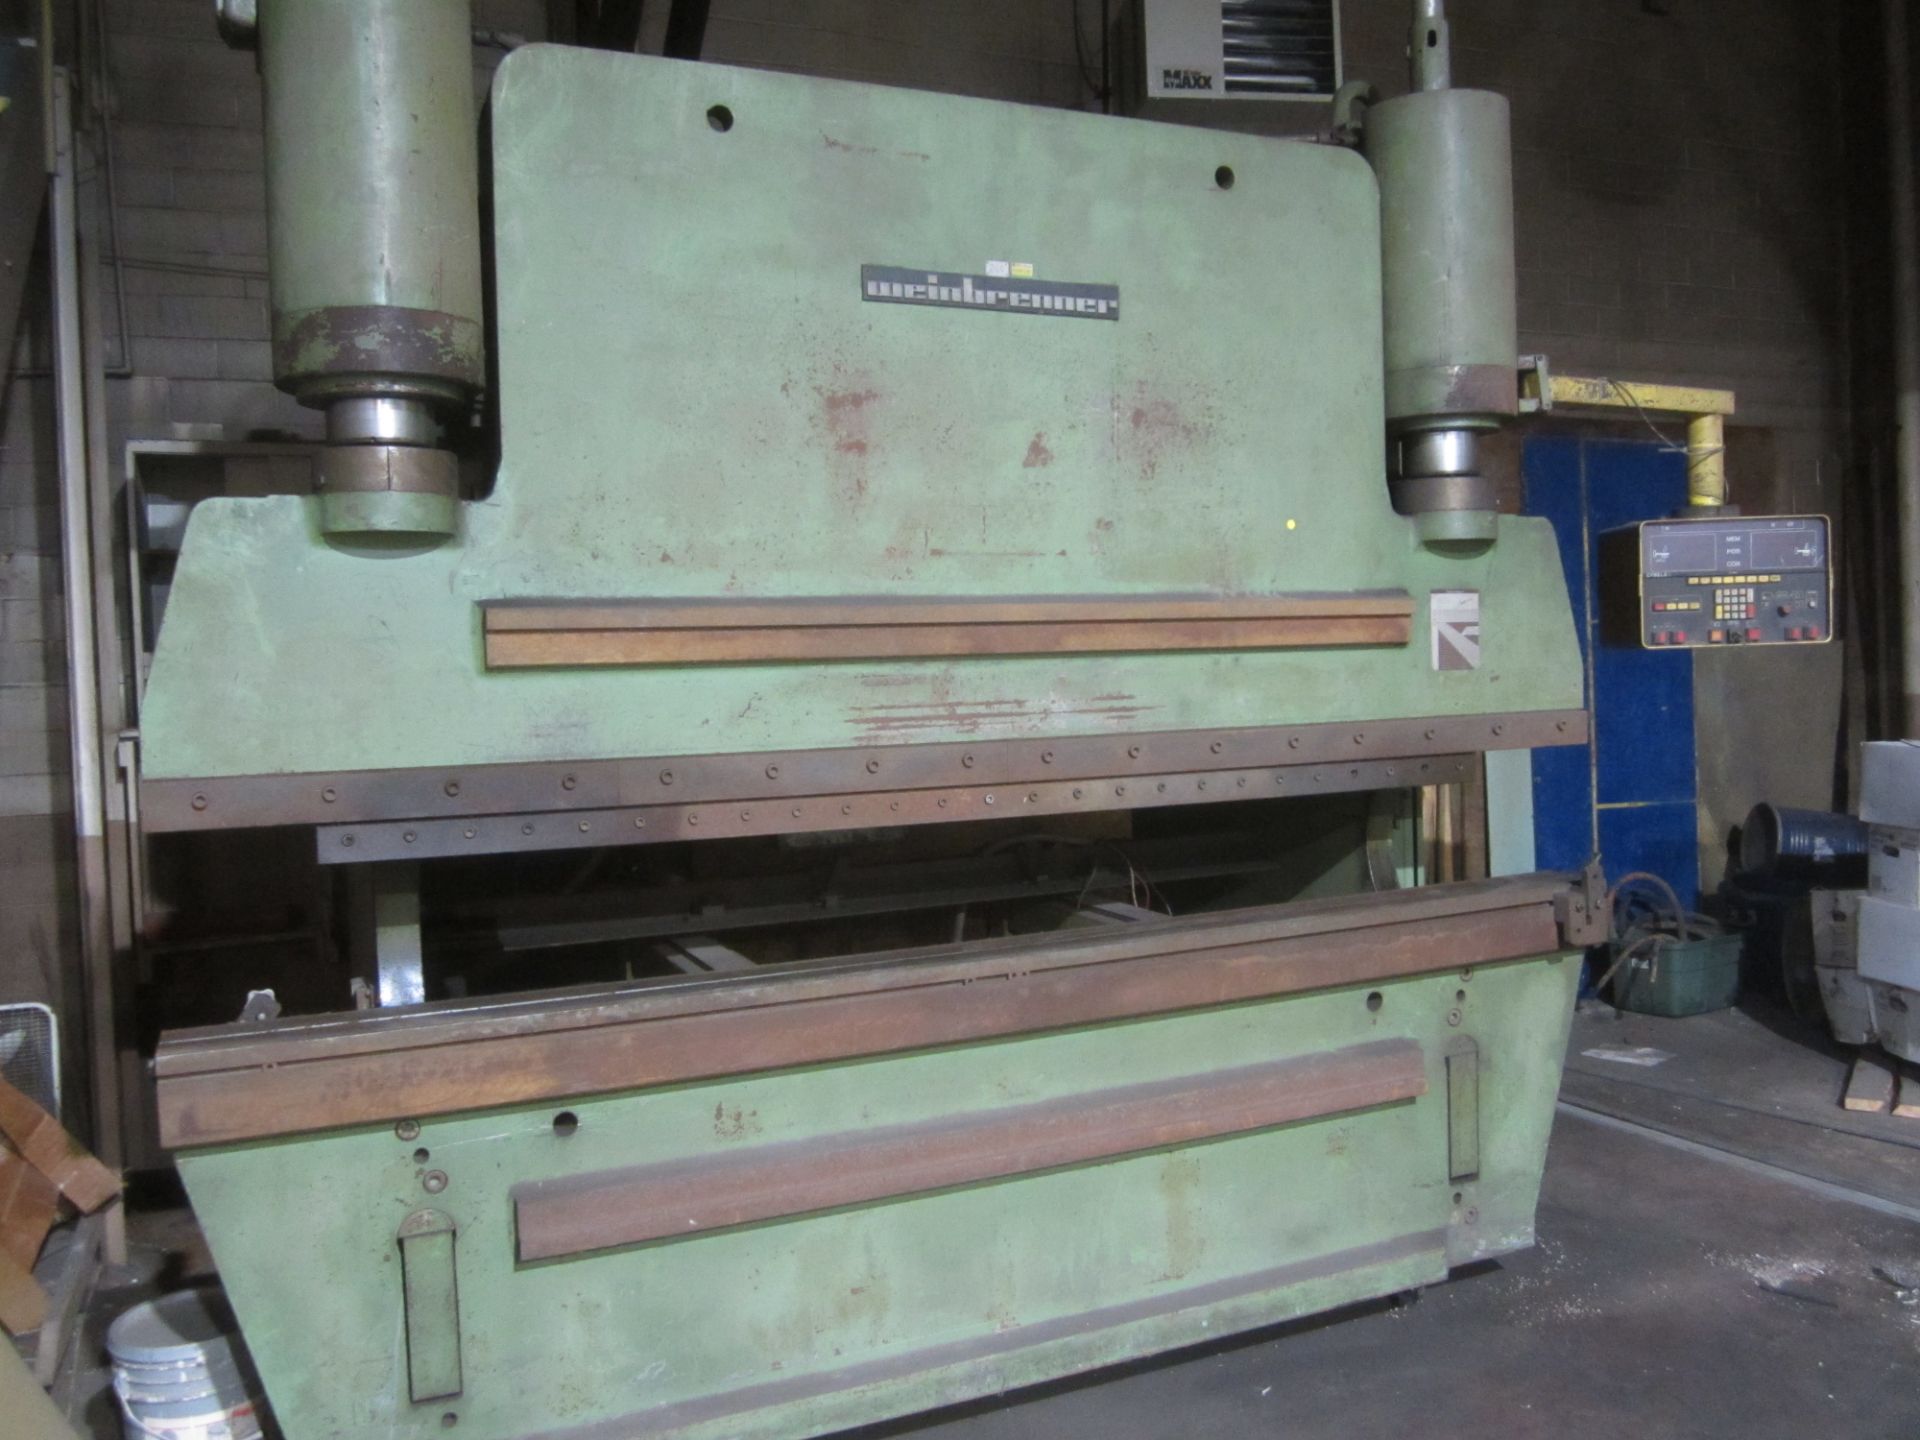 Weinbrenner Model AP150.1 Hydraulic Press Brake, s/n 733A, 10' X 165 Ton Capacity, 10'2" Overall Bed - Image 2 of 12